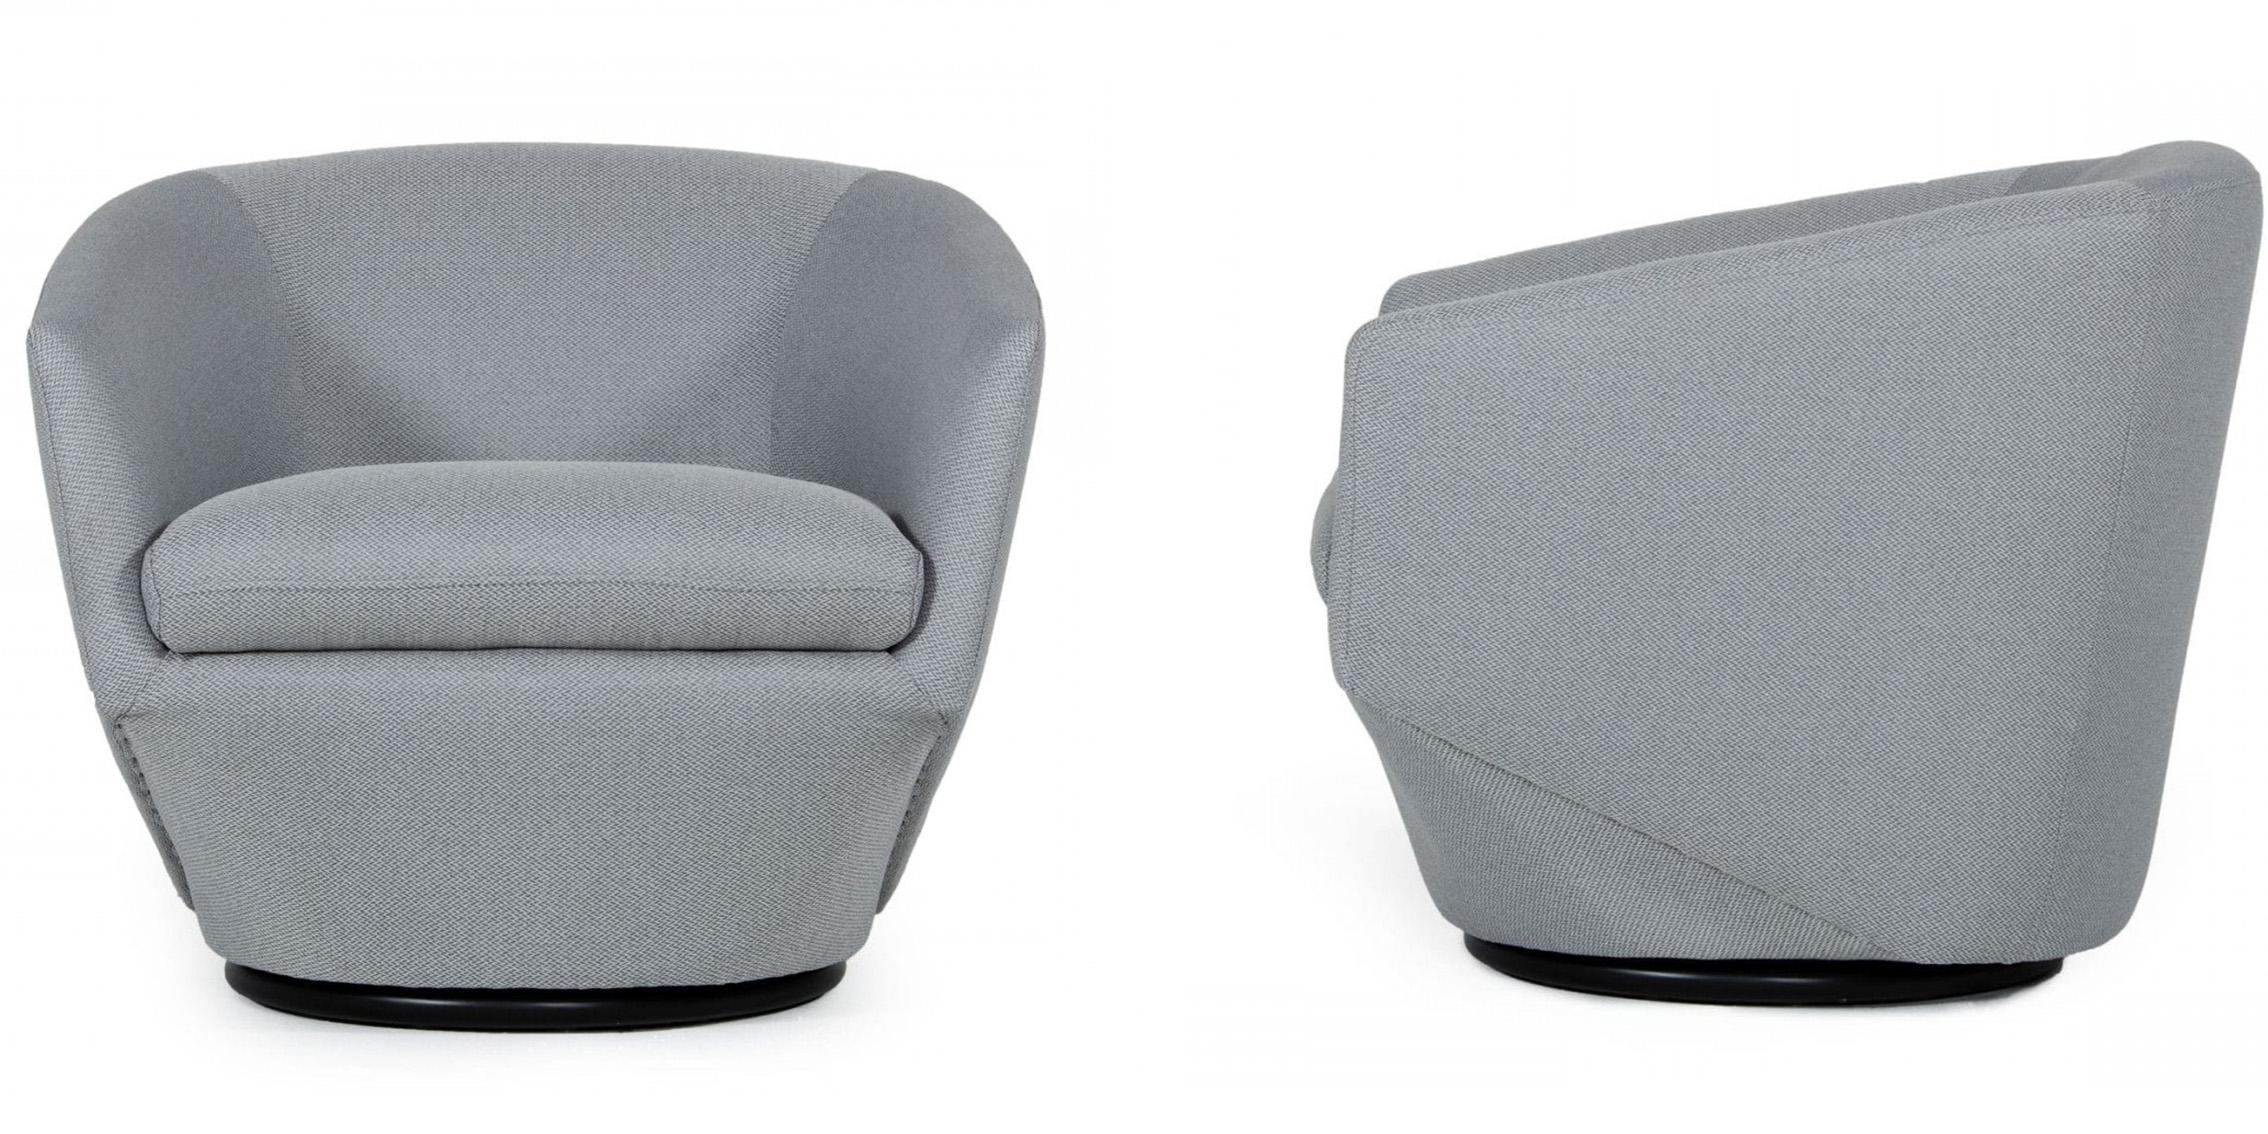 Contemporary, Modern Accent Chair Set VGKKKFA1032-GRY-3-Set-2 VGKKKFA1032-GRY-3-3-Set-2 in Gray Fabric